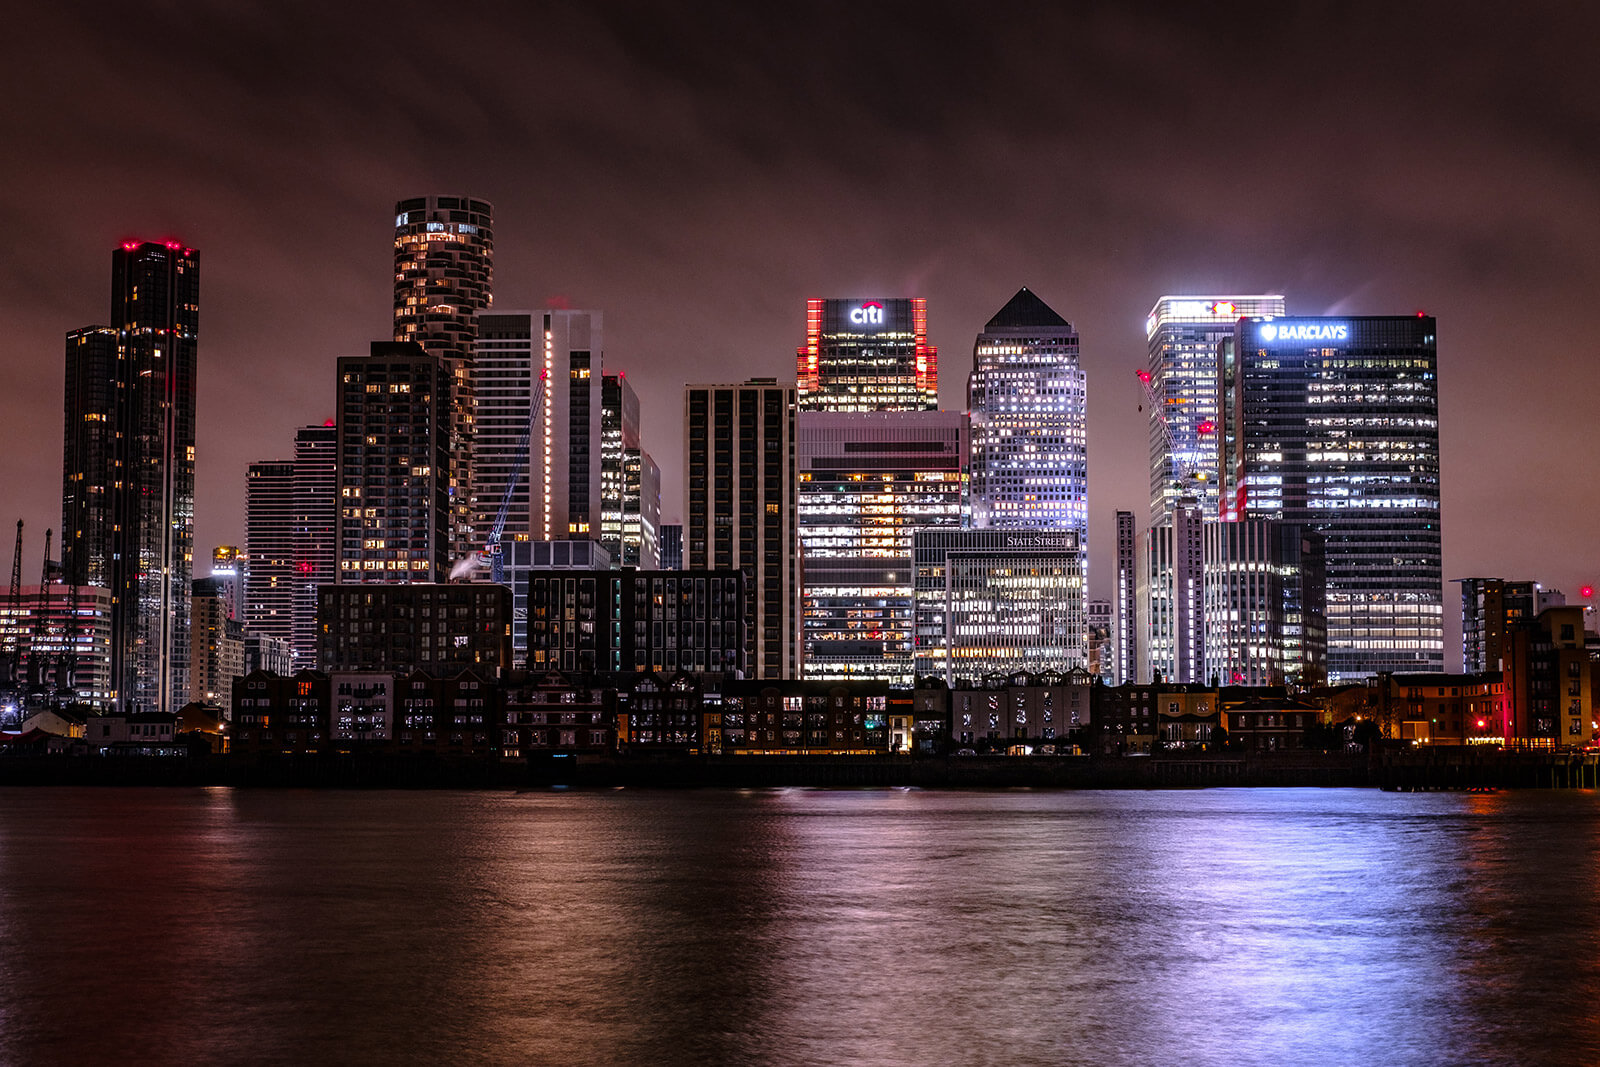 The pantheon of global banking in Canary Wharf. Source